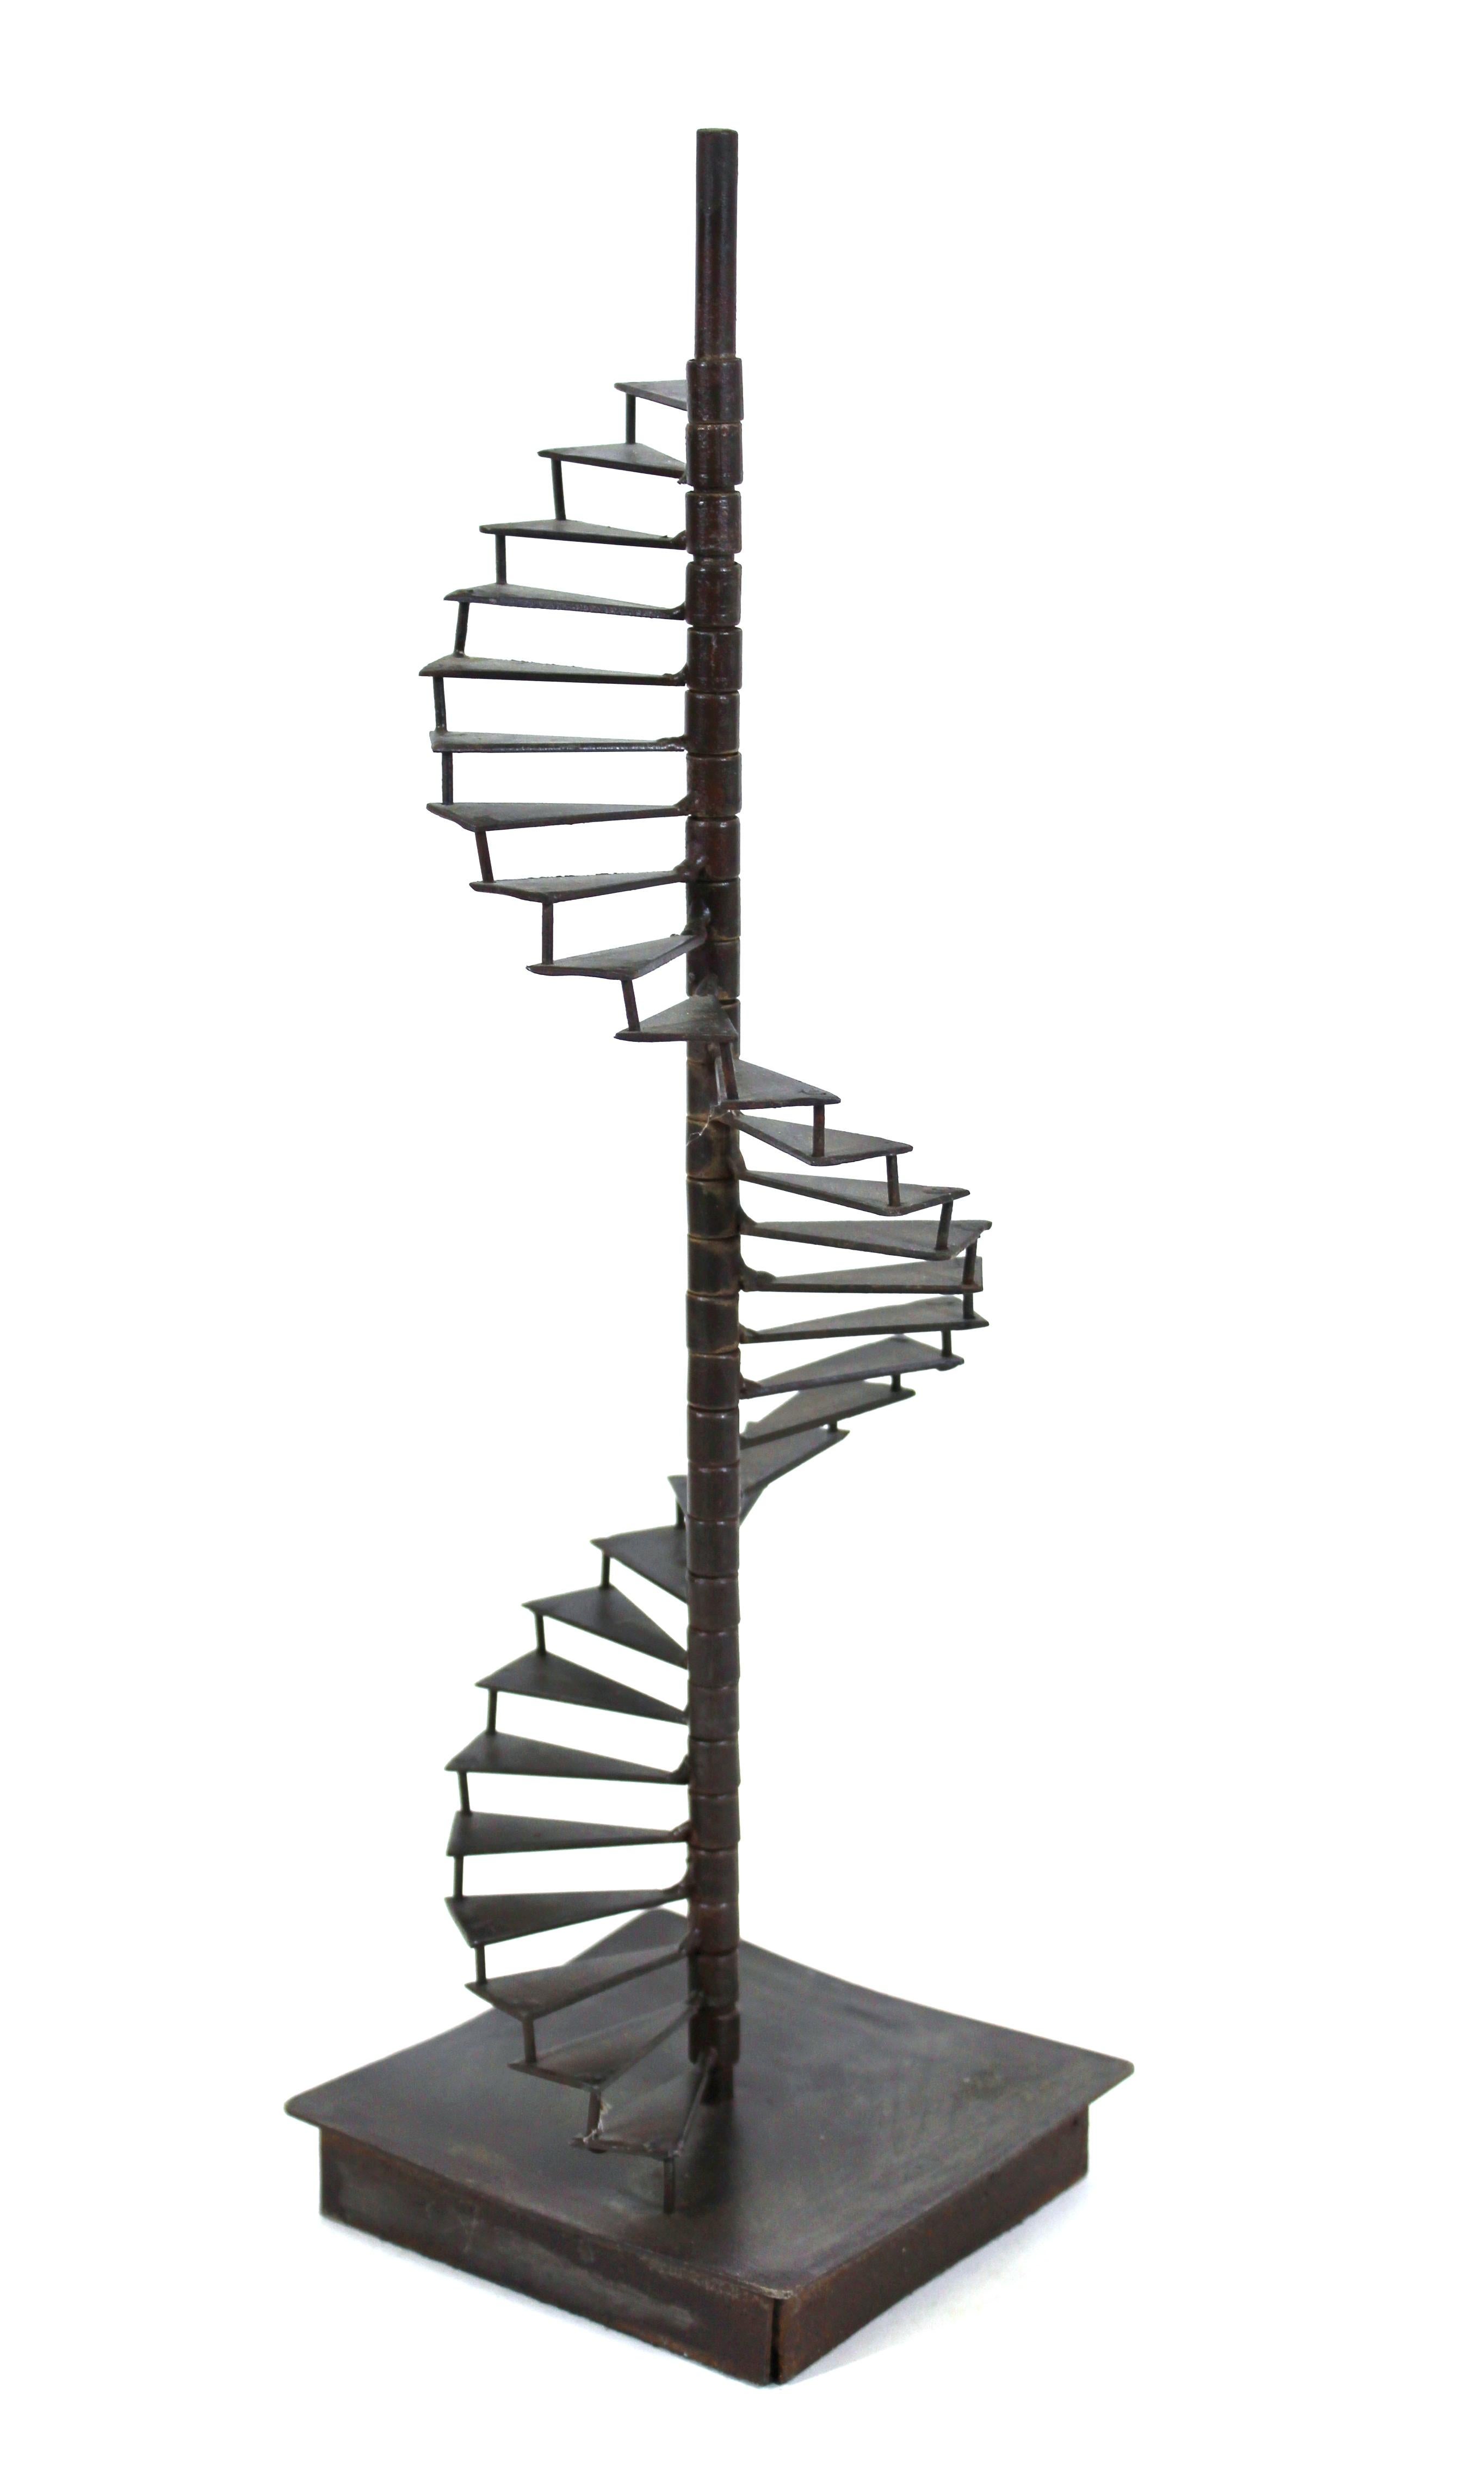 Modern scale model of a spiraling staircase in welded metal, mounted on square metal base.